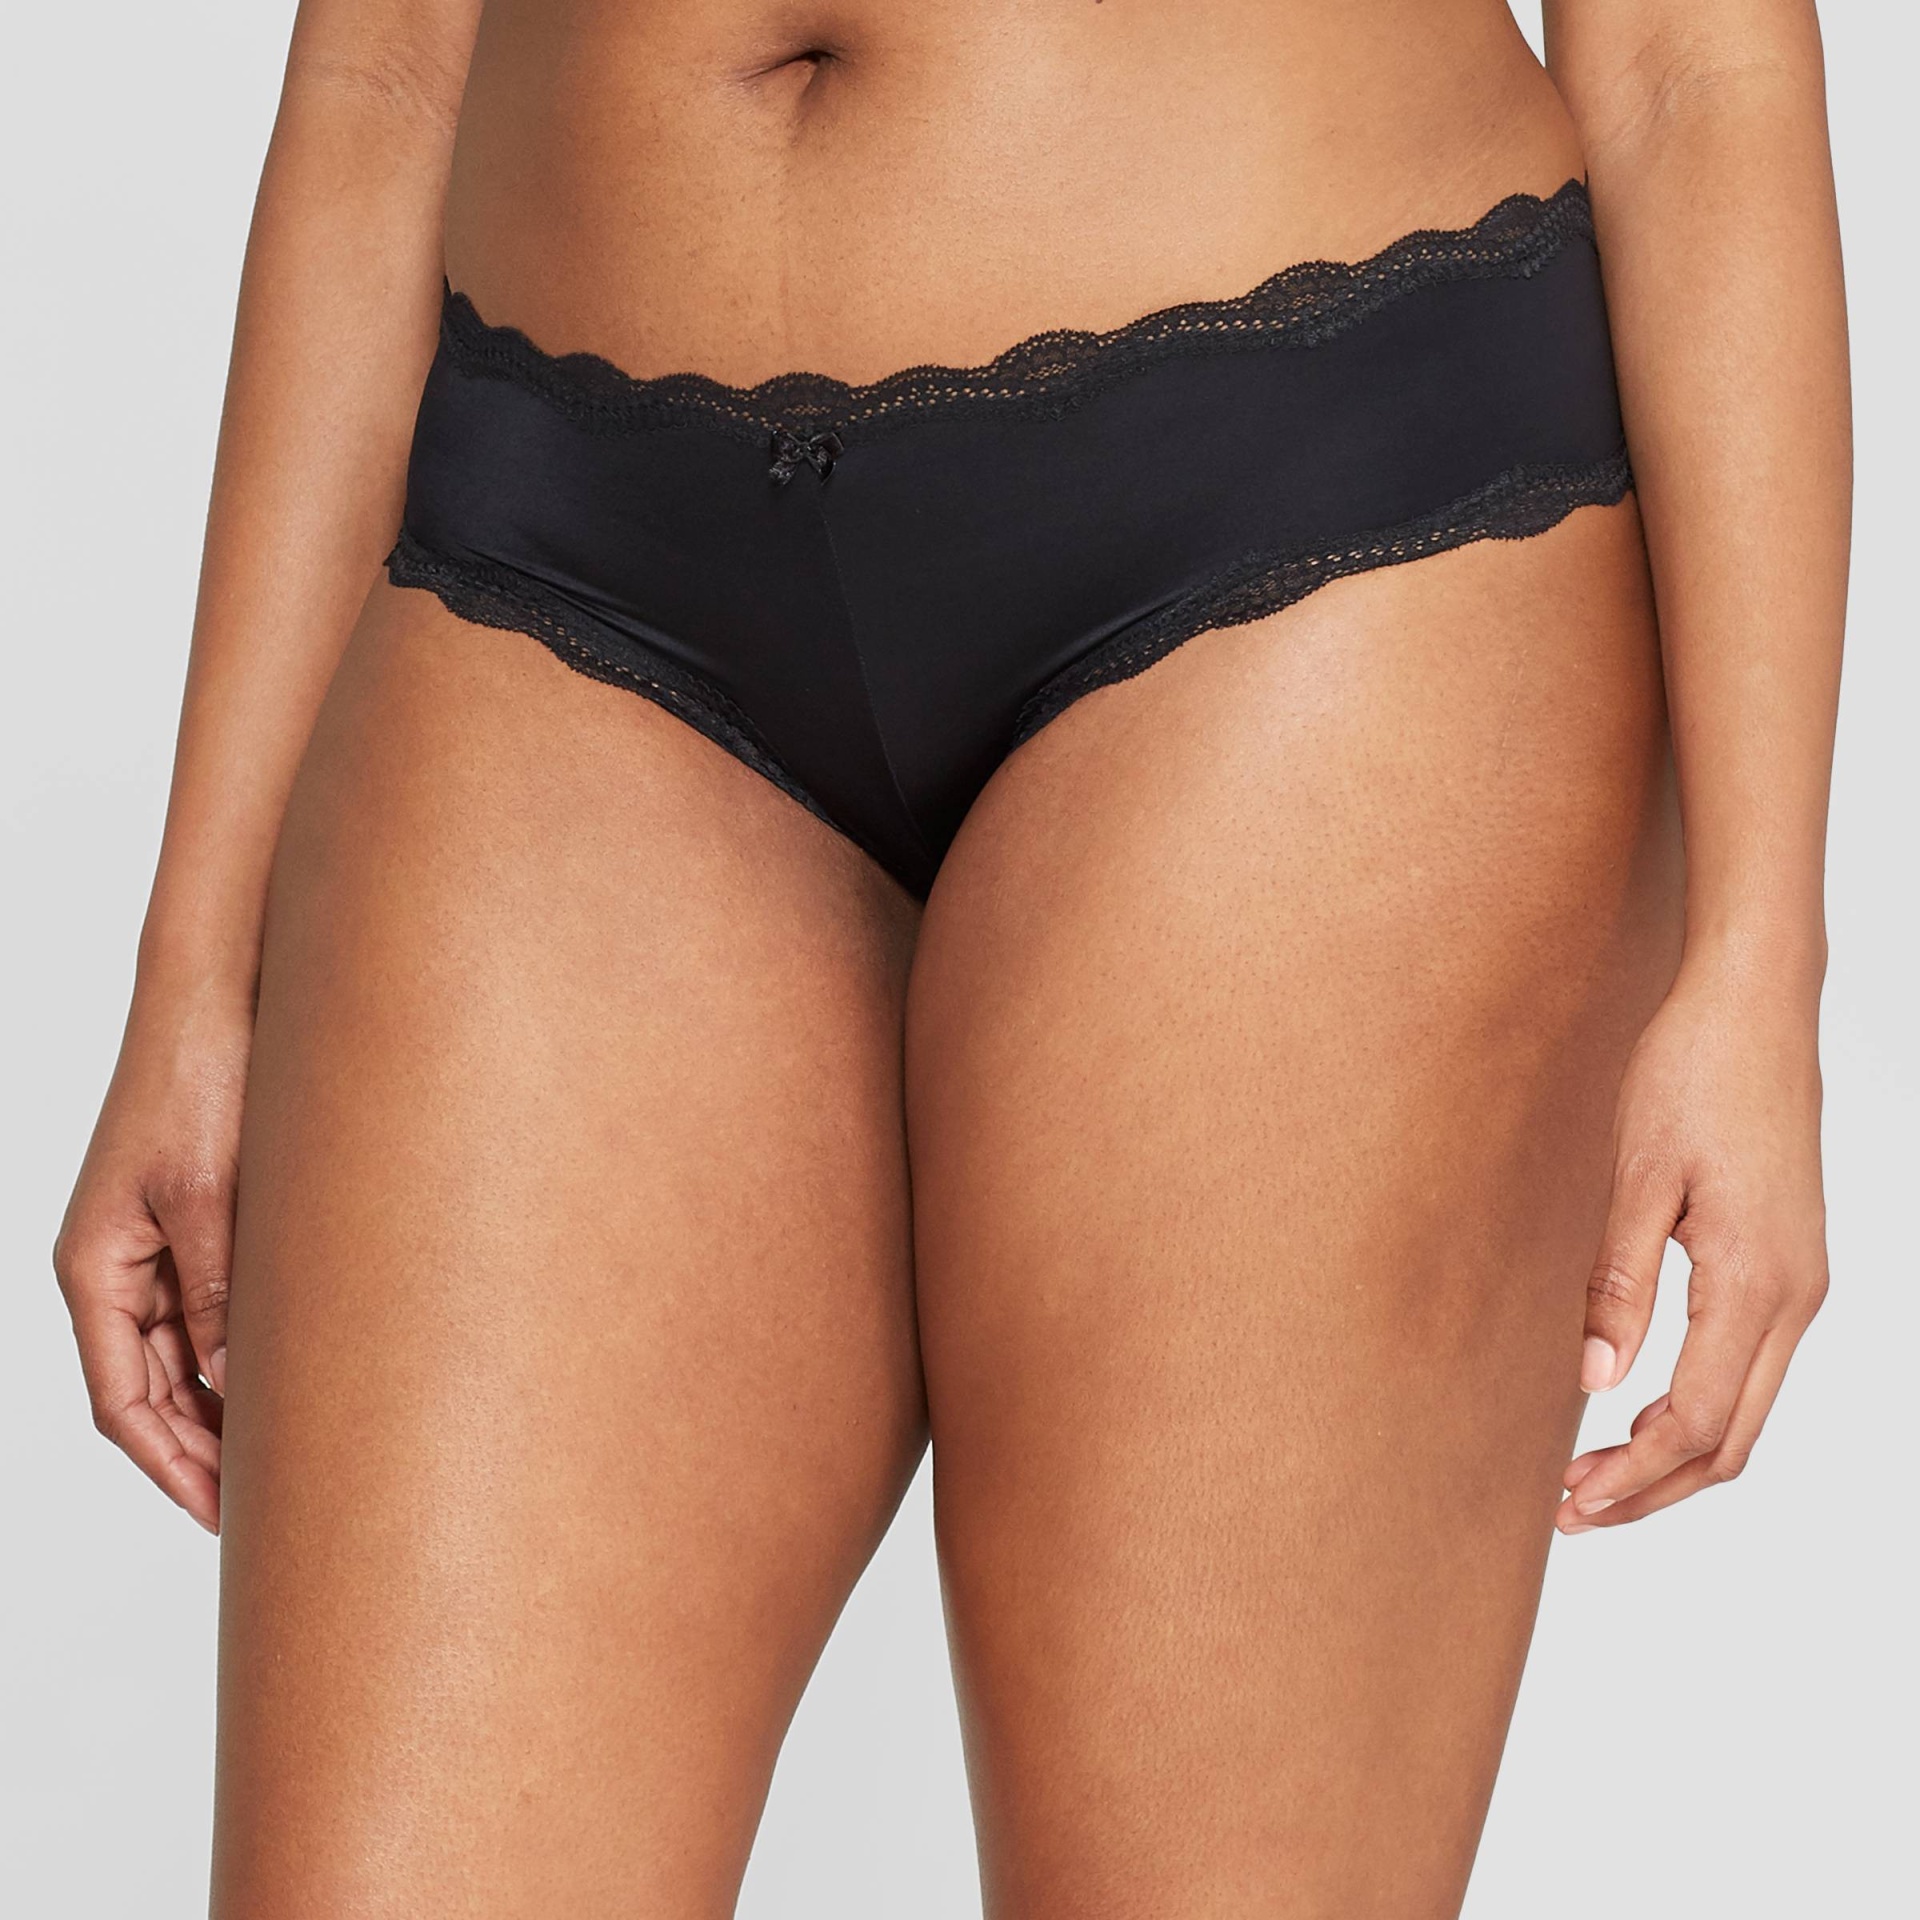 Women's Micro Cheeky Underwear with Lace - Auden Black L 1 ct